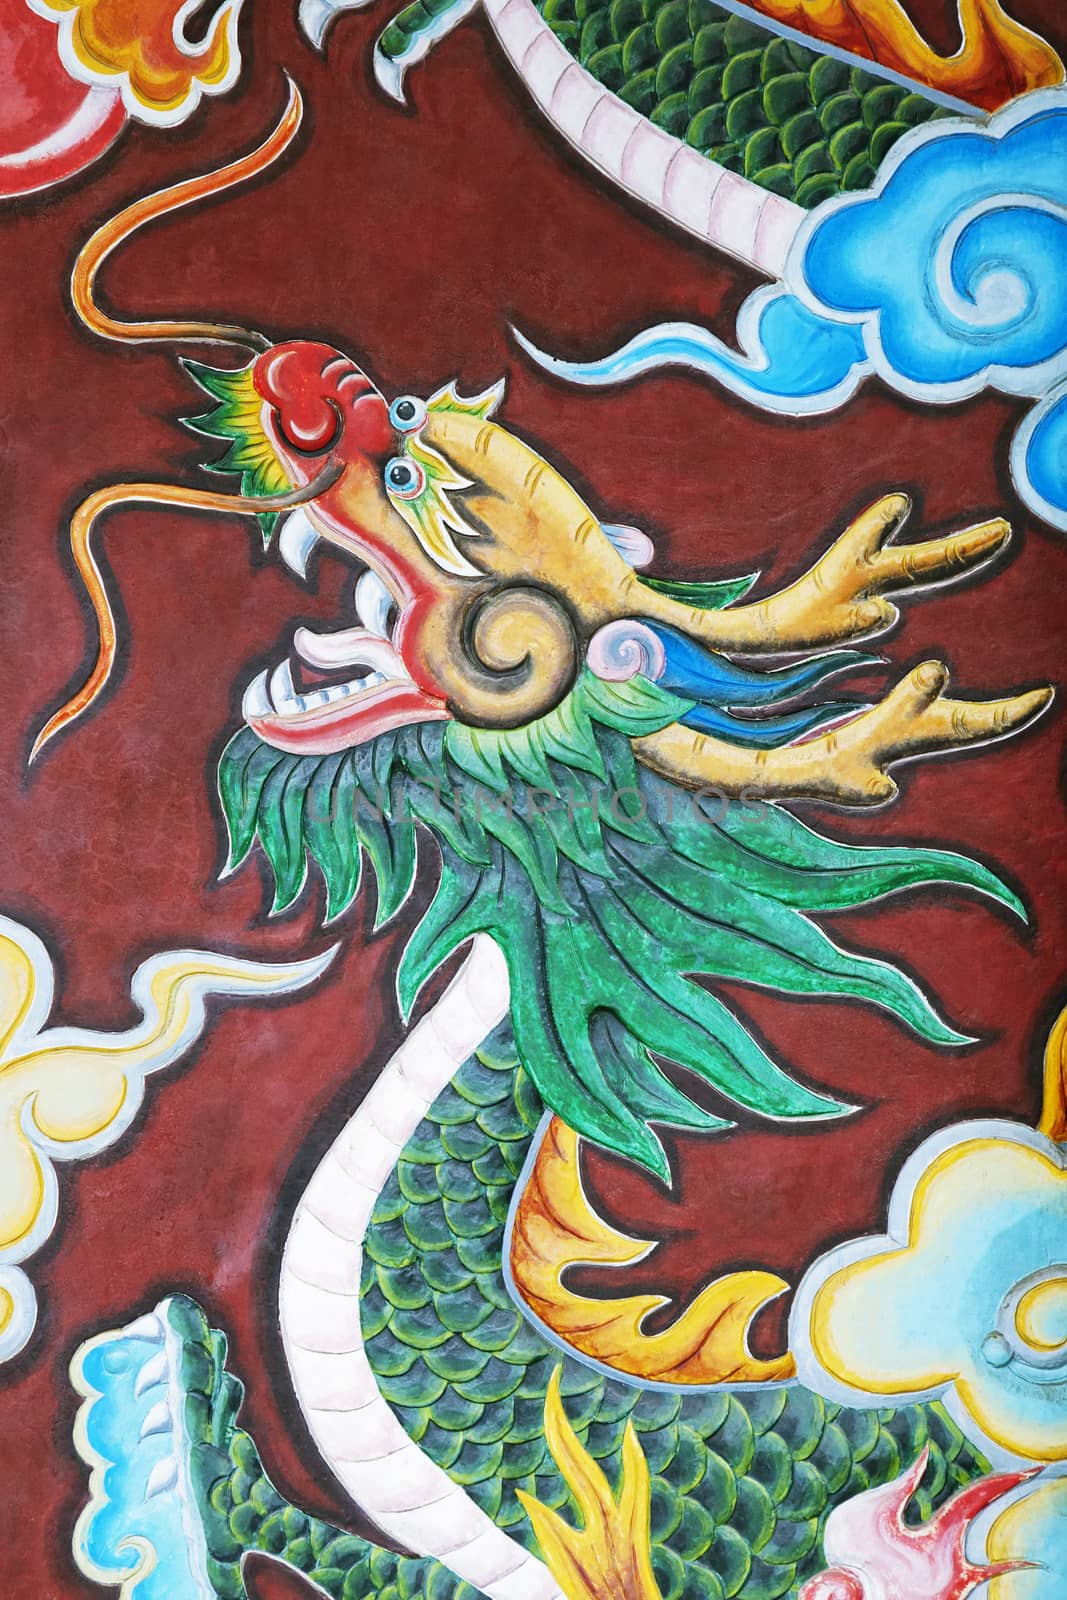 Dragon decoration of a temple in Vietnam by Goodday